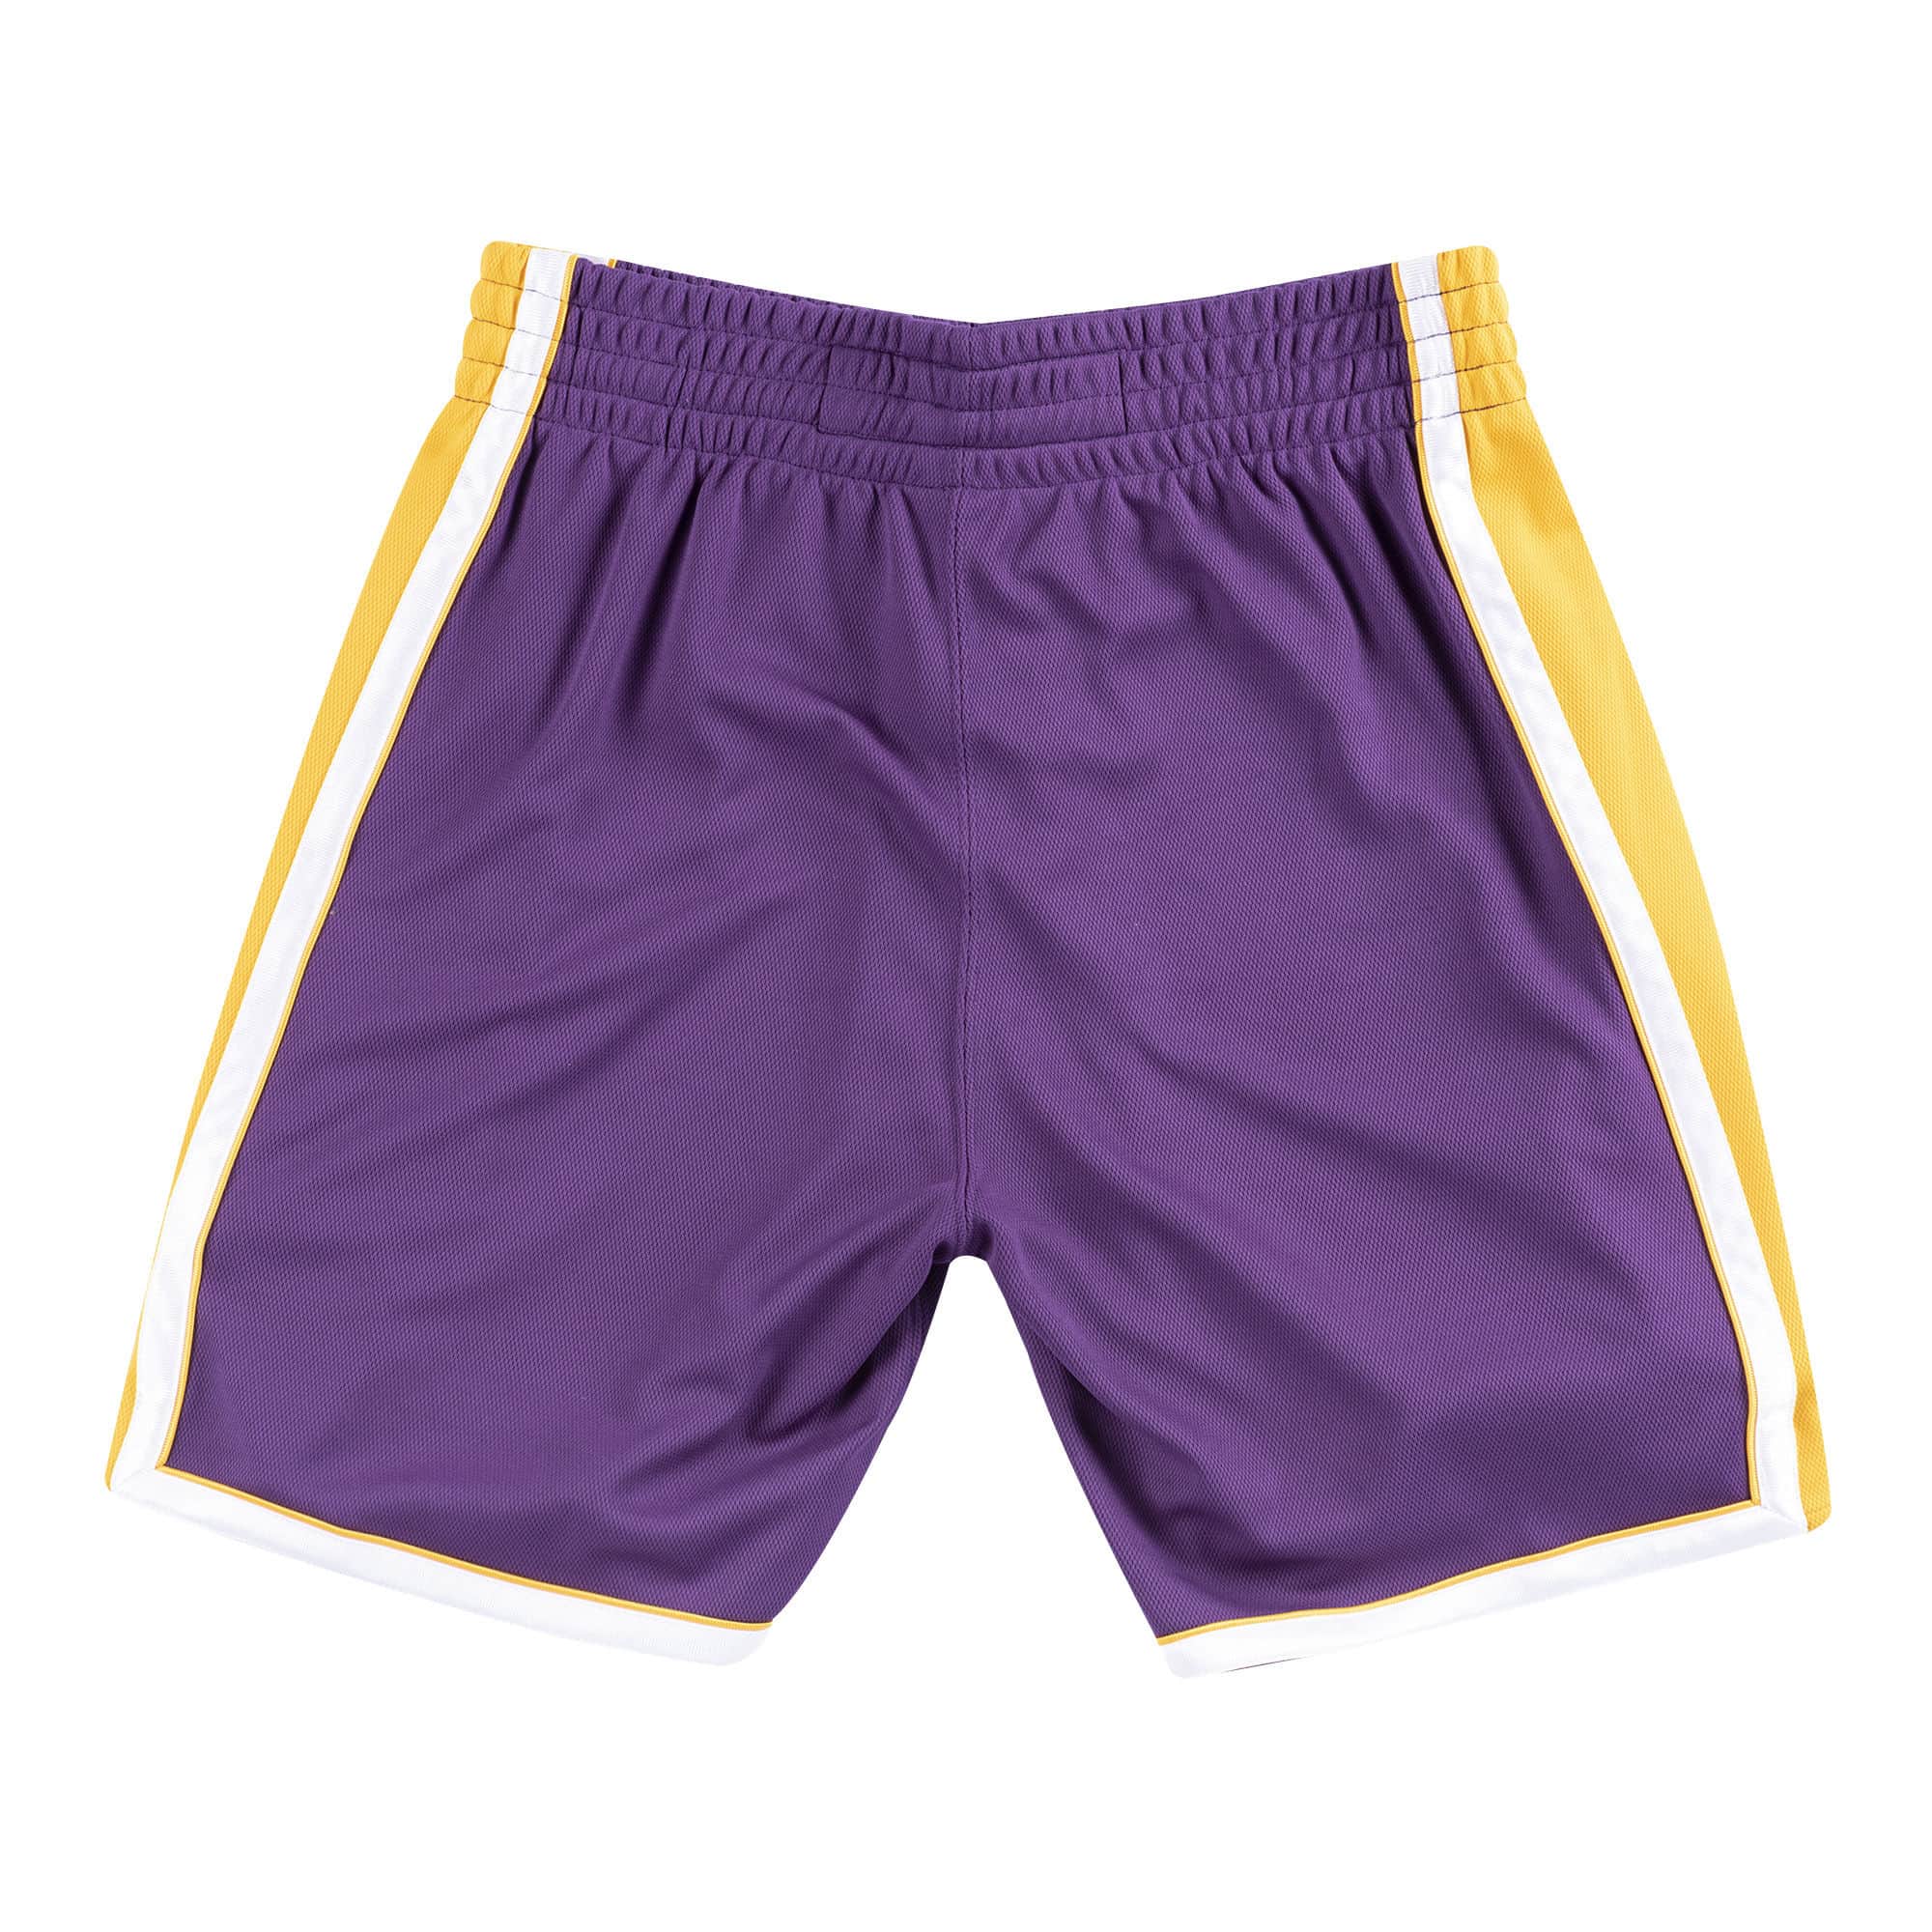 Mitchell & Ness NBA Authentic Shorts Los Angeles Lakers Road 2008-09 Purple  - Purple